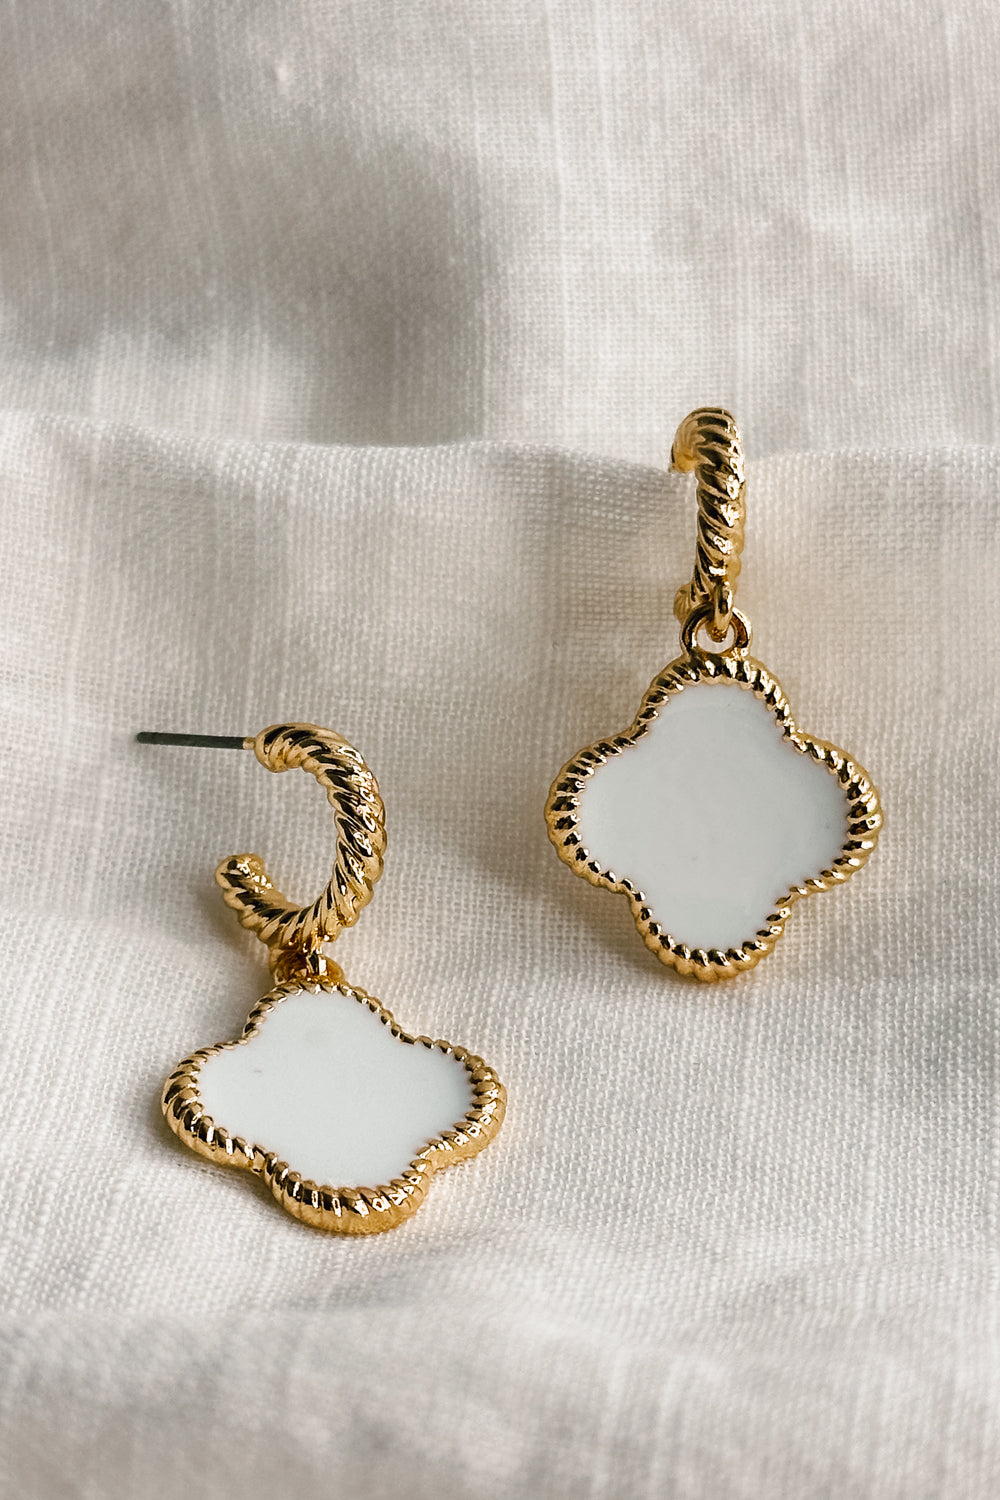 Close up view of the Fayla White and Gold Clover Earring which features white clover shaped medallions, gold roped details and ear cuff clasp closure